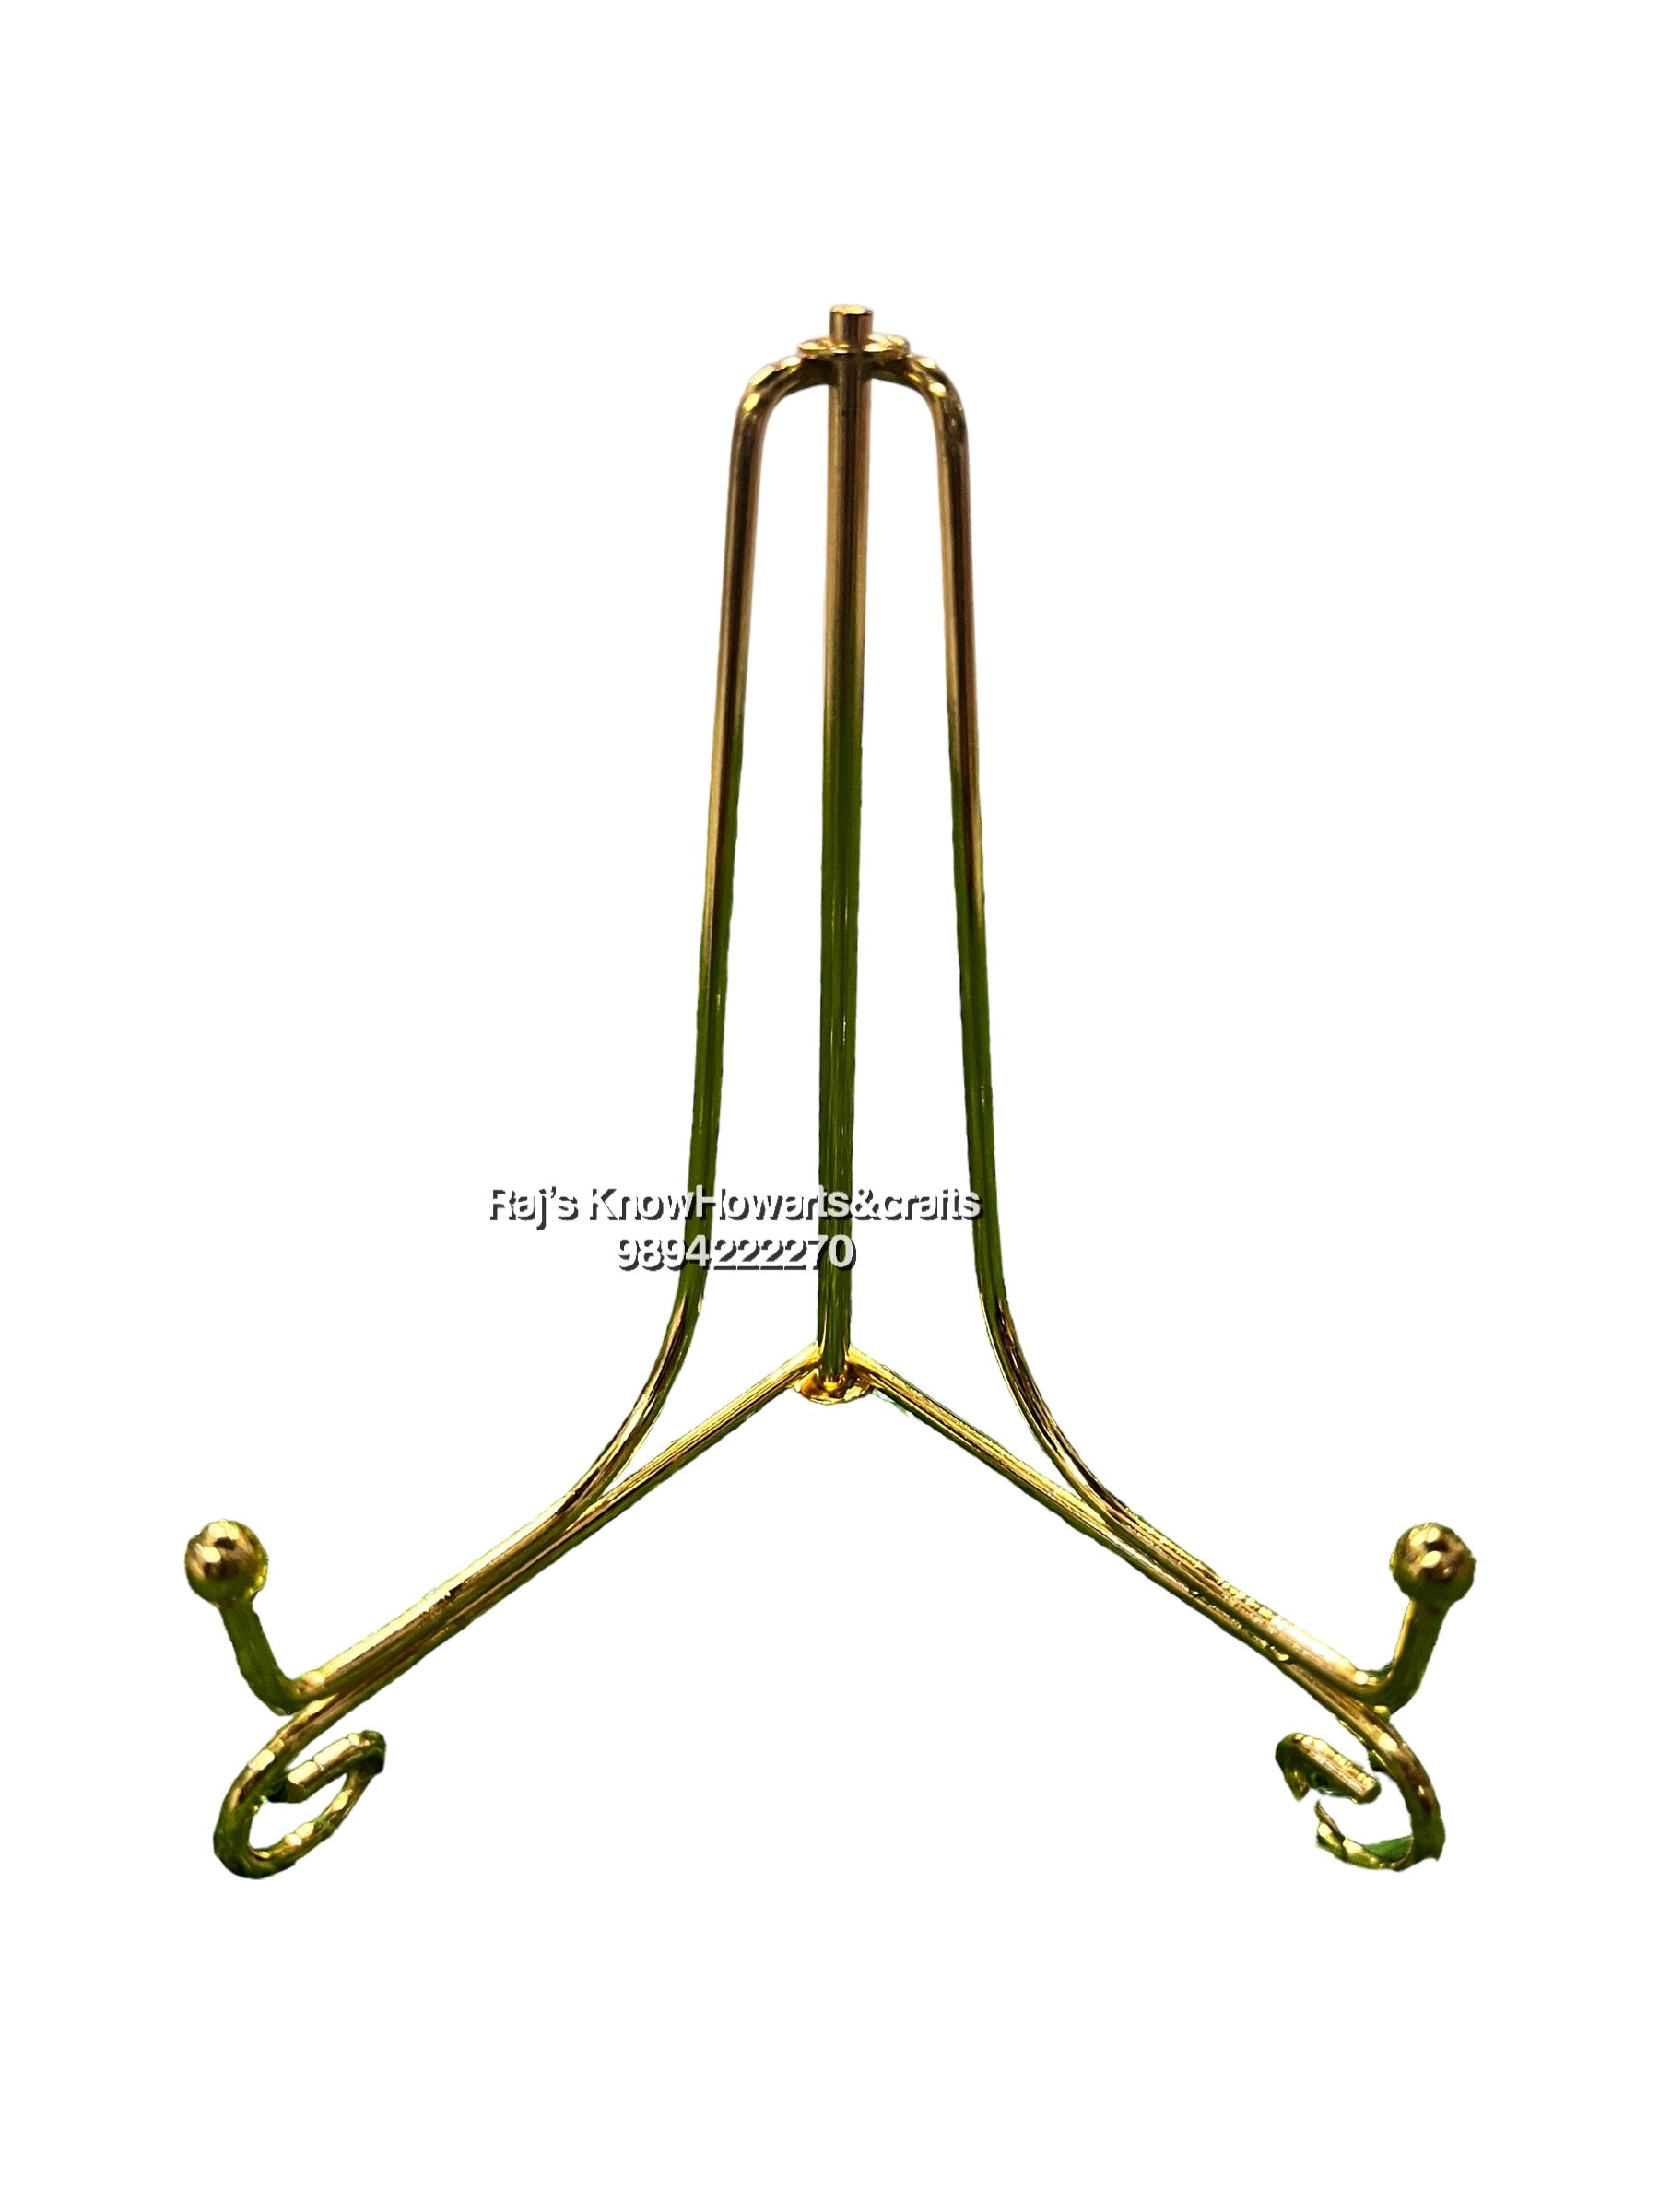 Gold metal easel stand - medium size